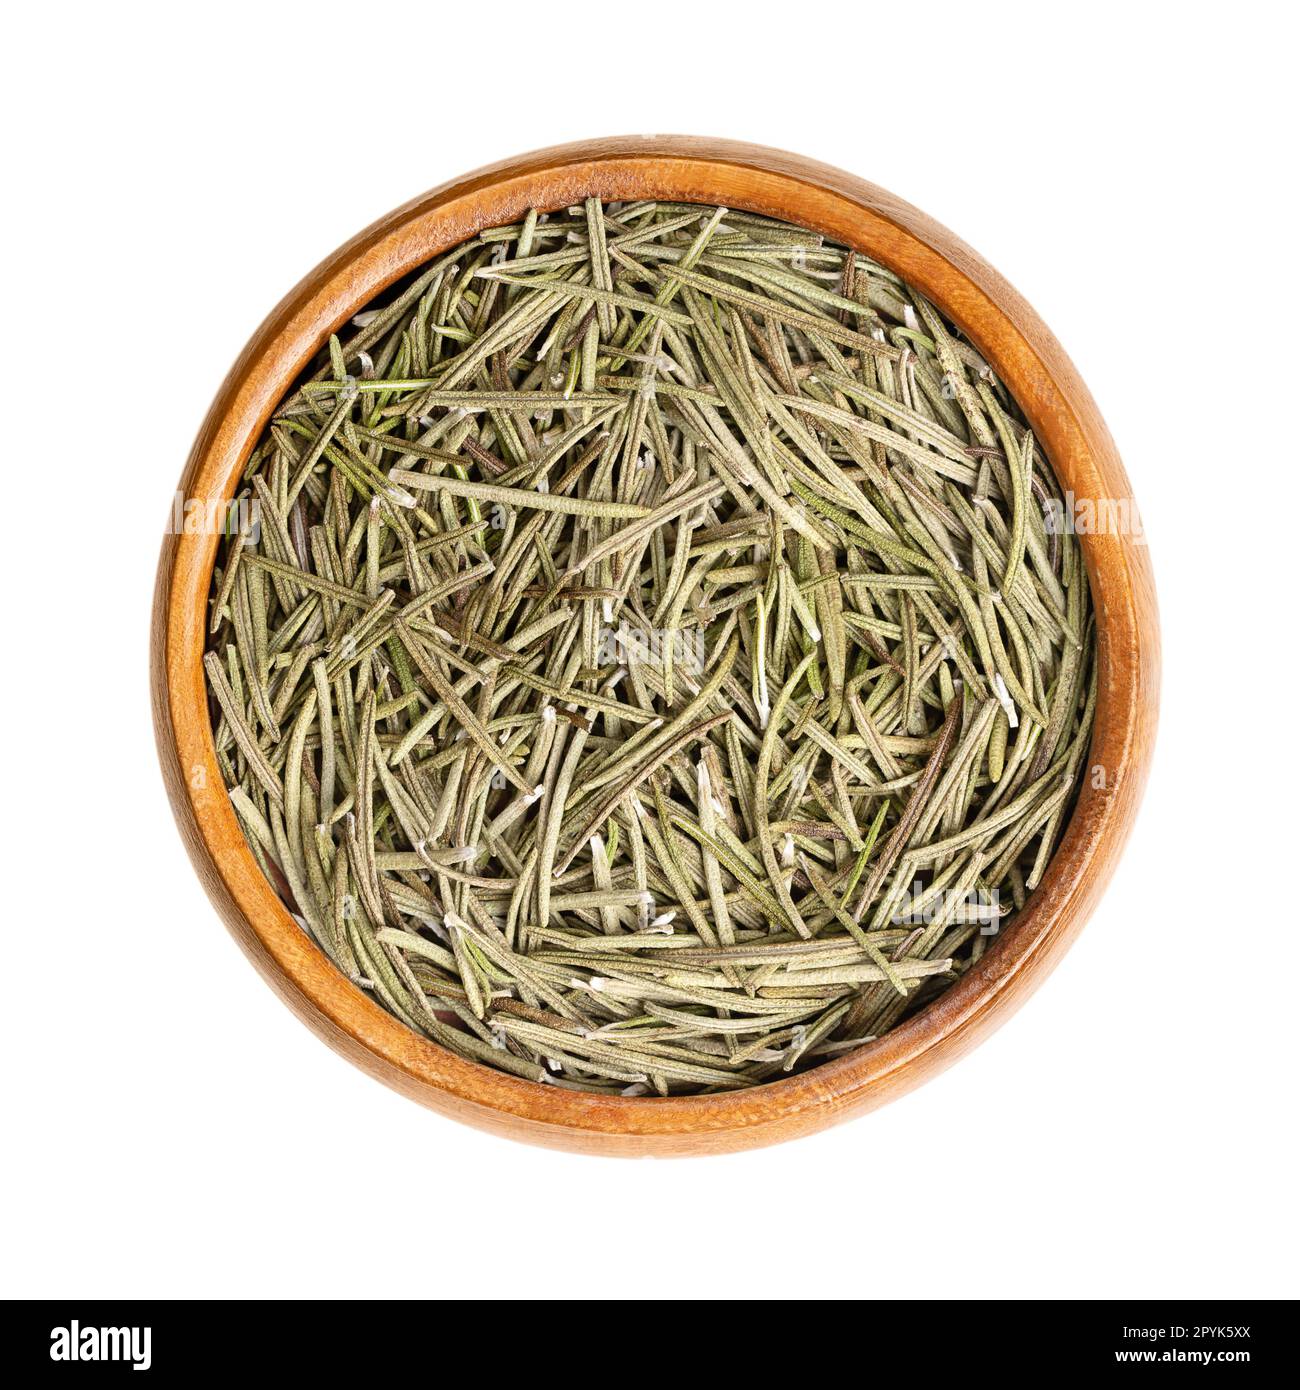 Dried rosemary leaves, fragrant needle-like green leaves, in wooden bowl Stock Photo